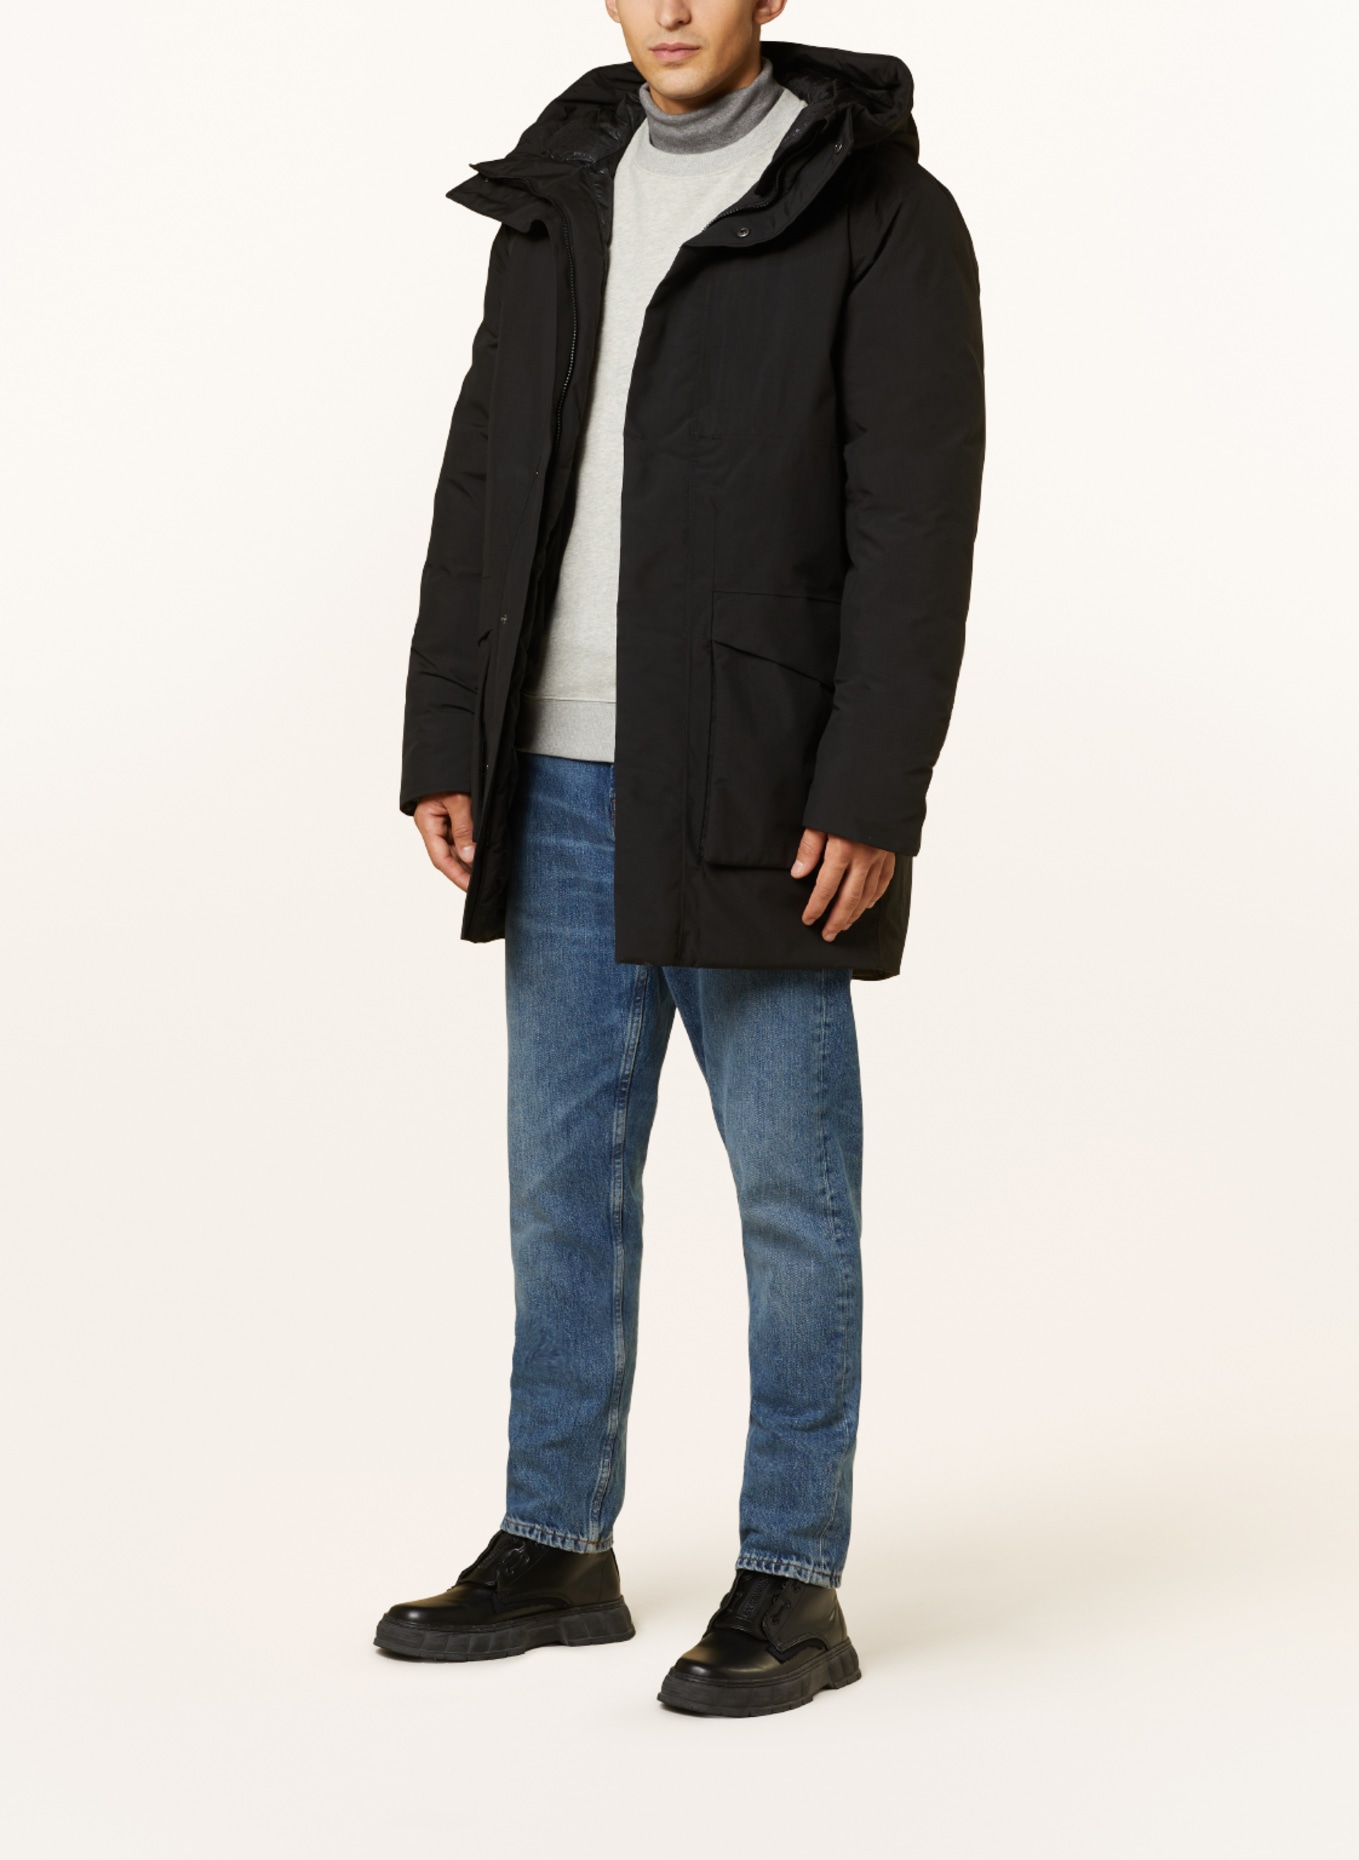 Parka in DIDRIKSONS AKILLES black